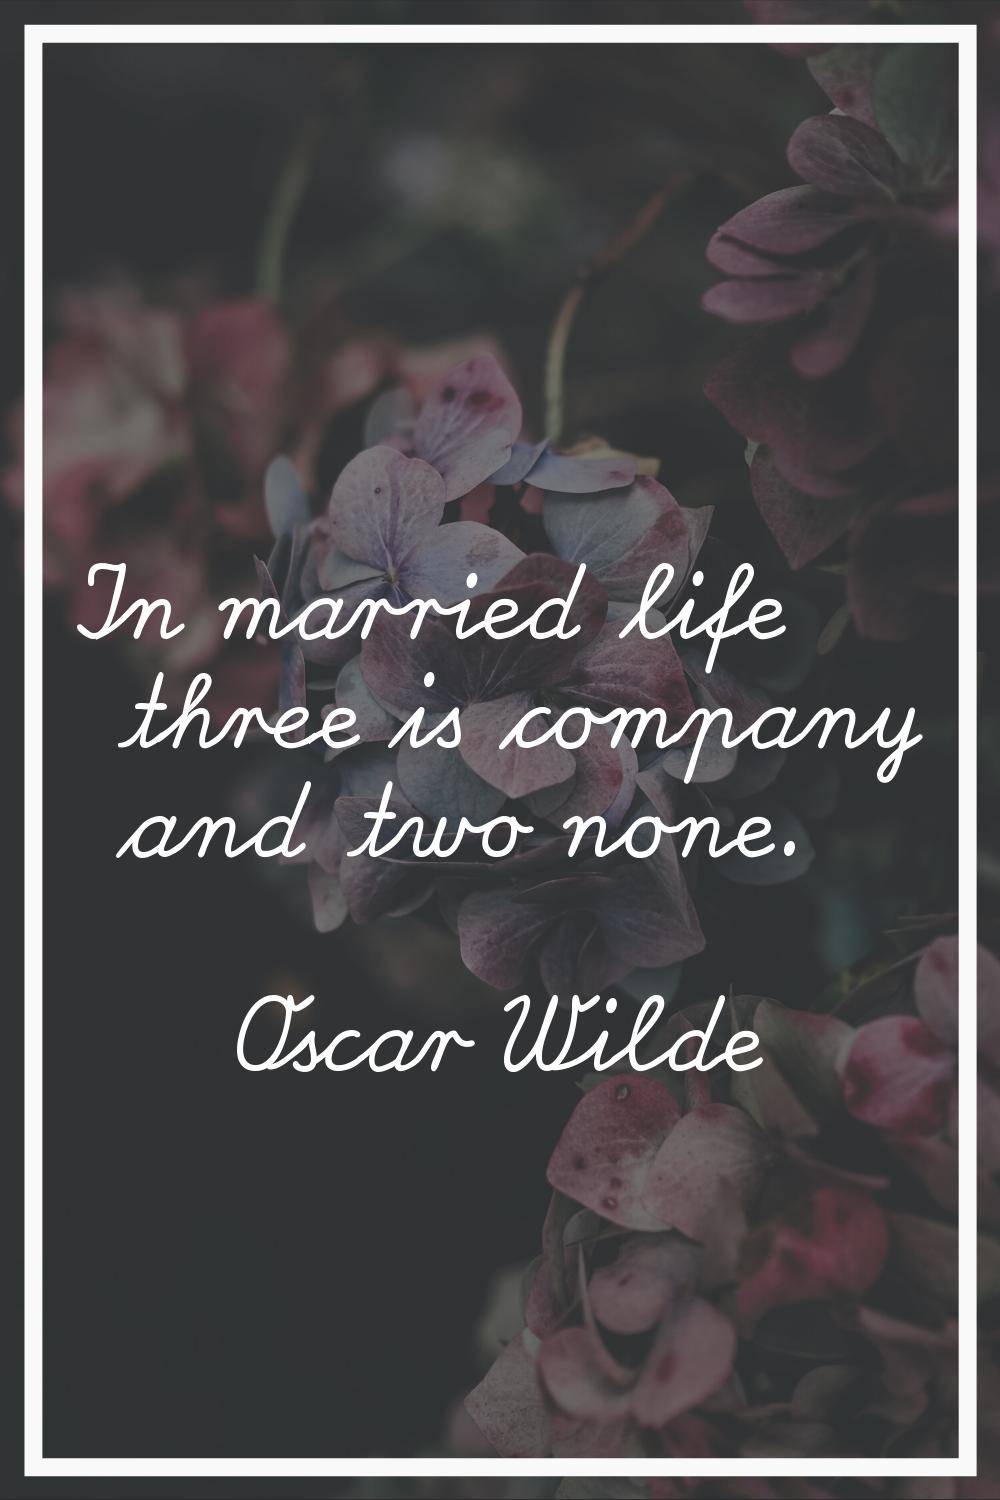 In married life three is company and two none.